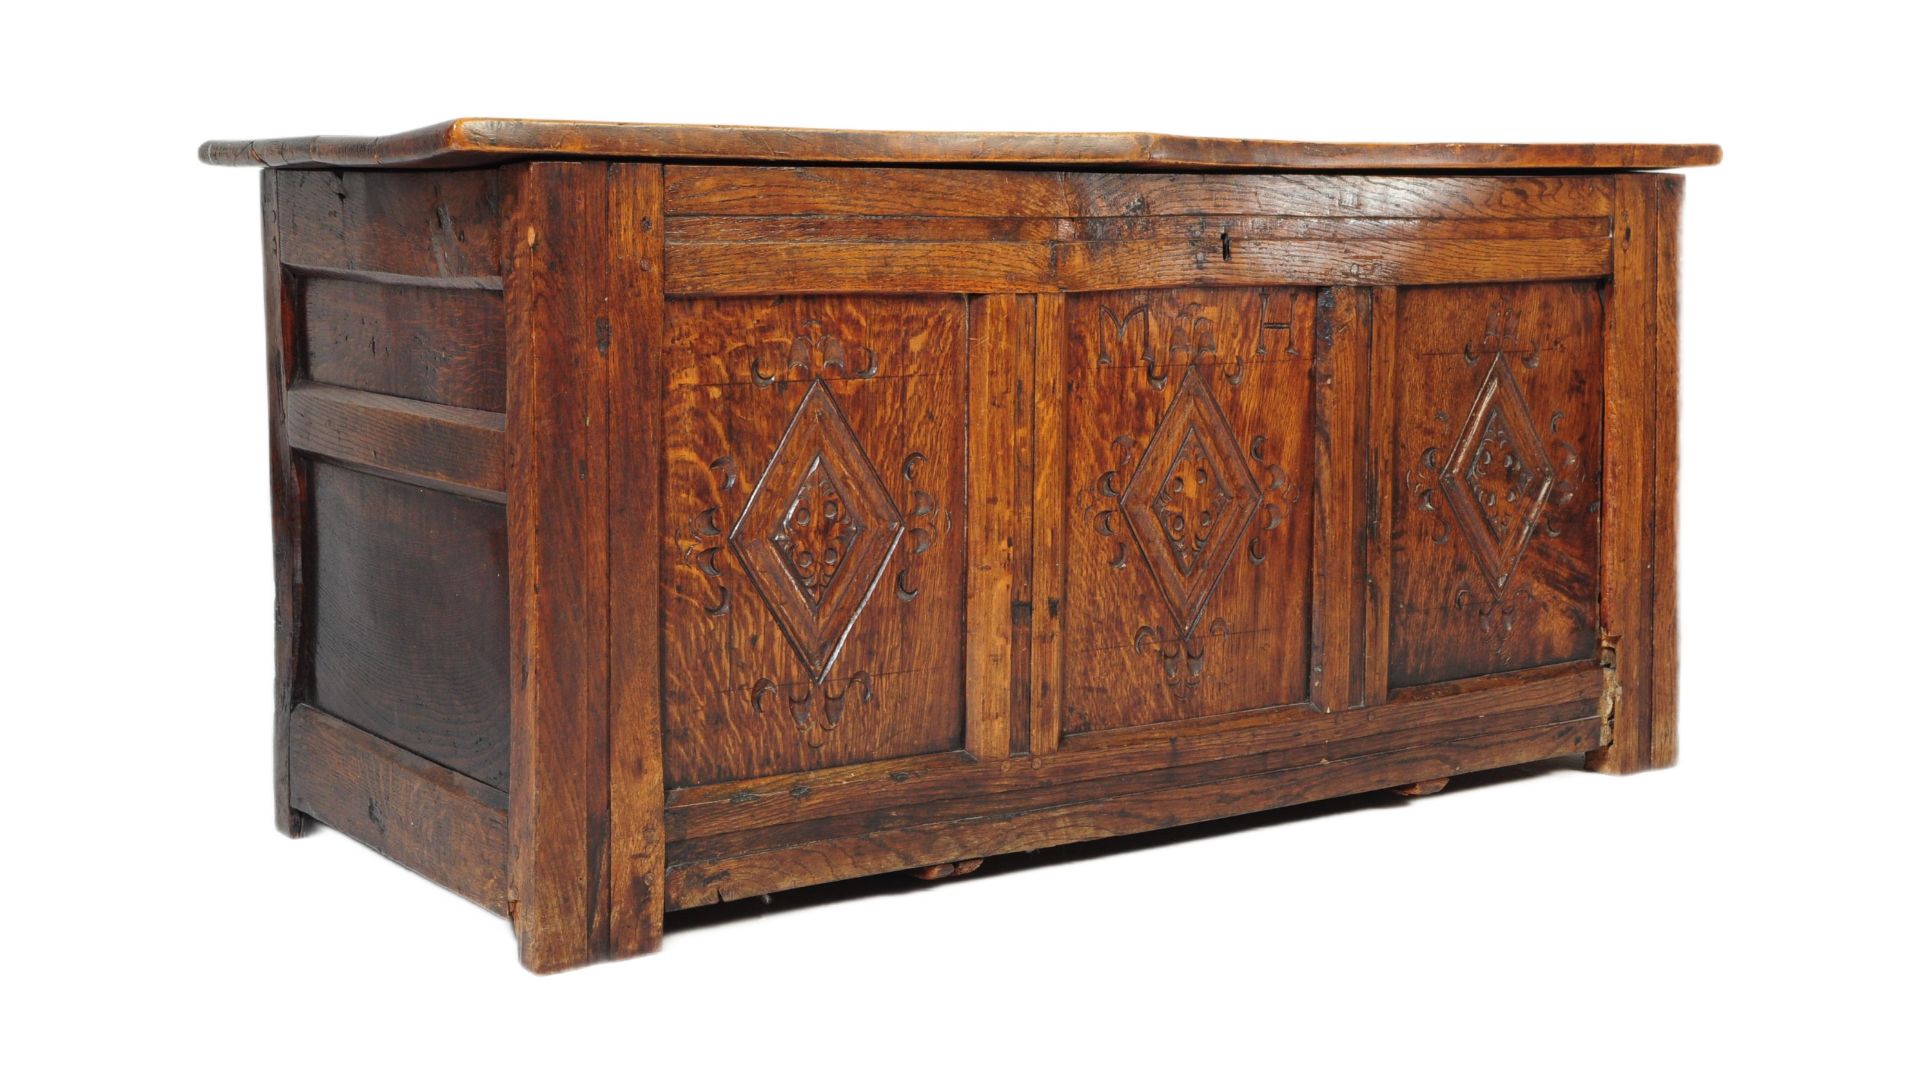 18TH CENTURY COUNTRY ELM AND OAK LARGE COFFER CHEST